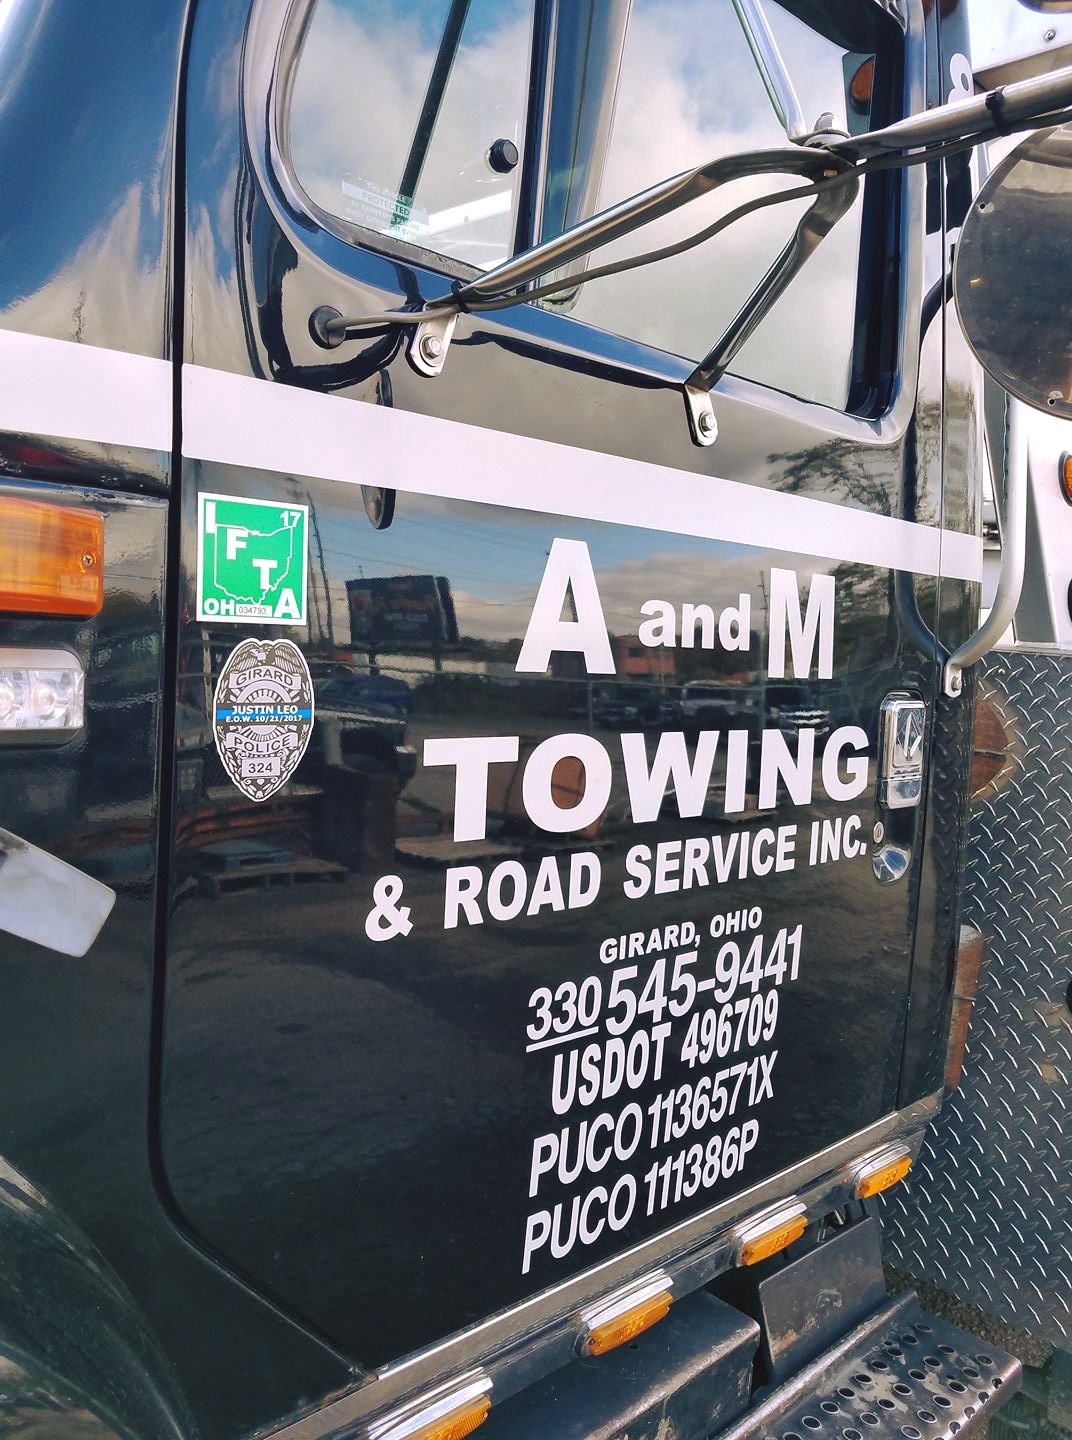 A And M Towing & Road Service Inc.